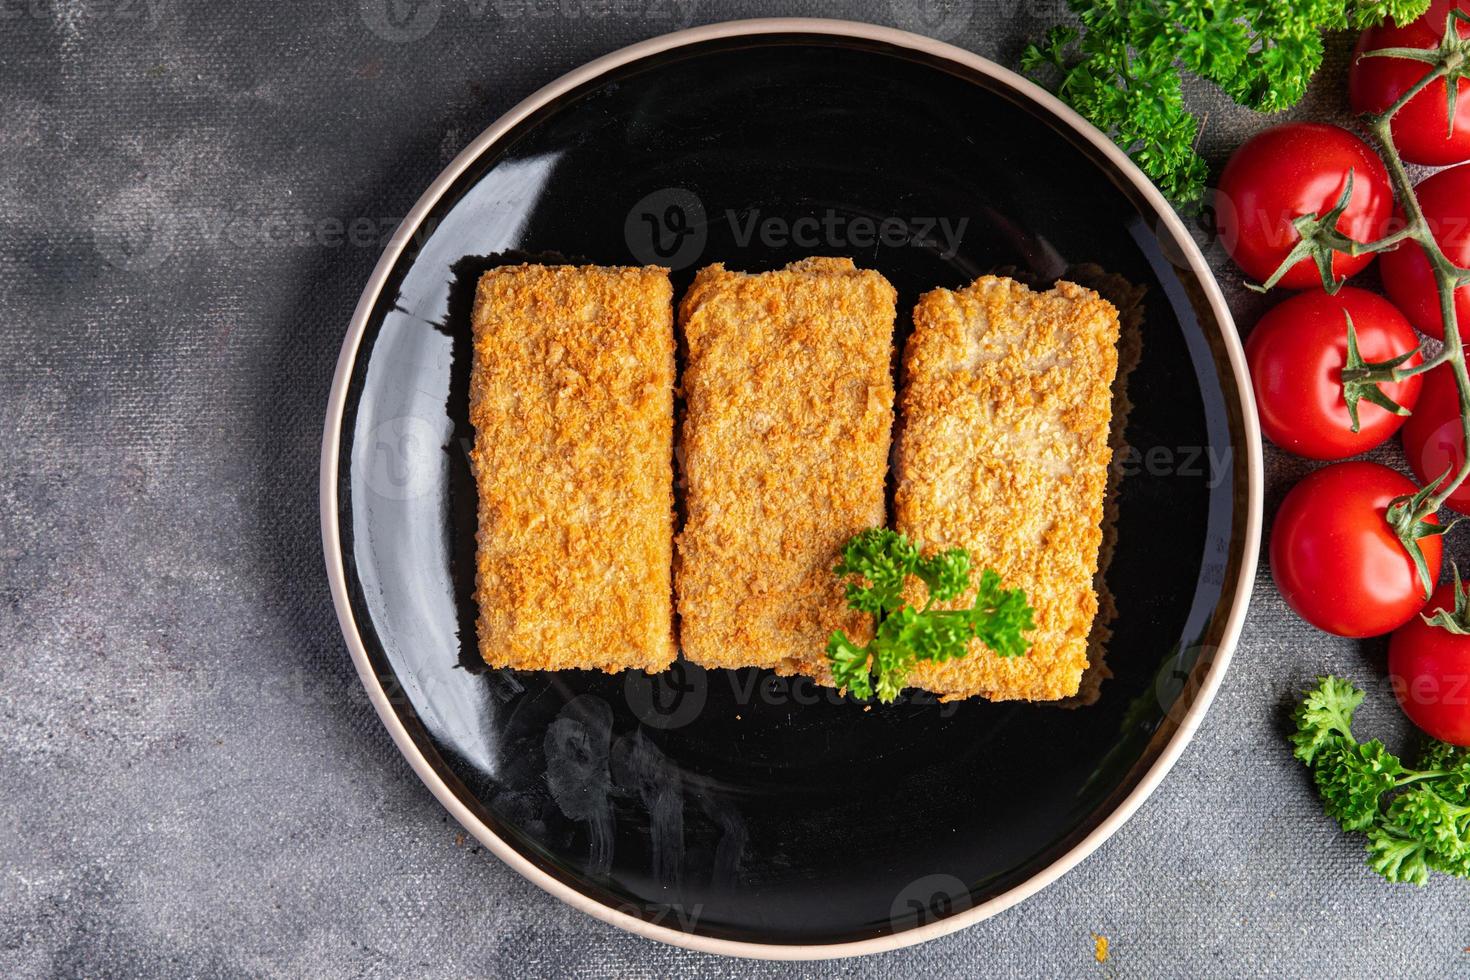 fish sticks deep fried seafood delicious snack healthy meal food snack on the table copy space food background photo